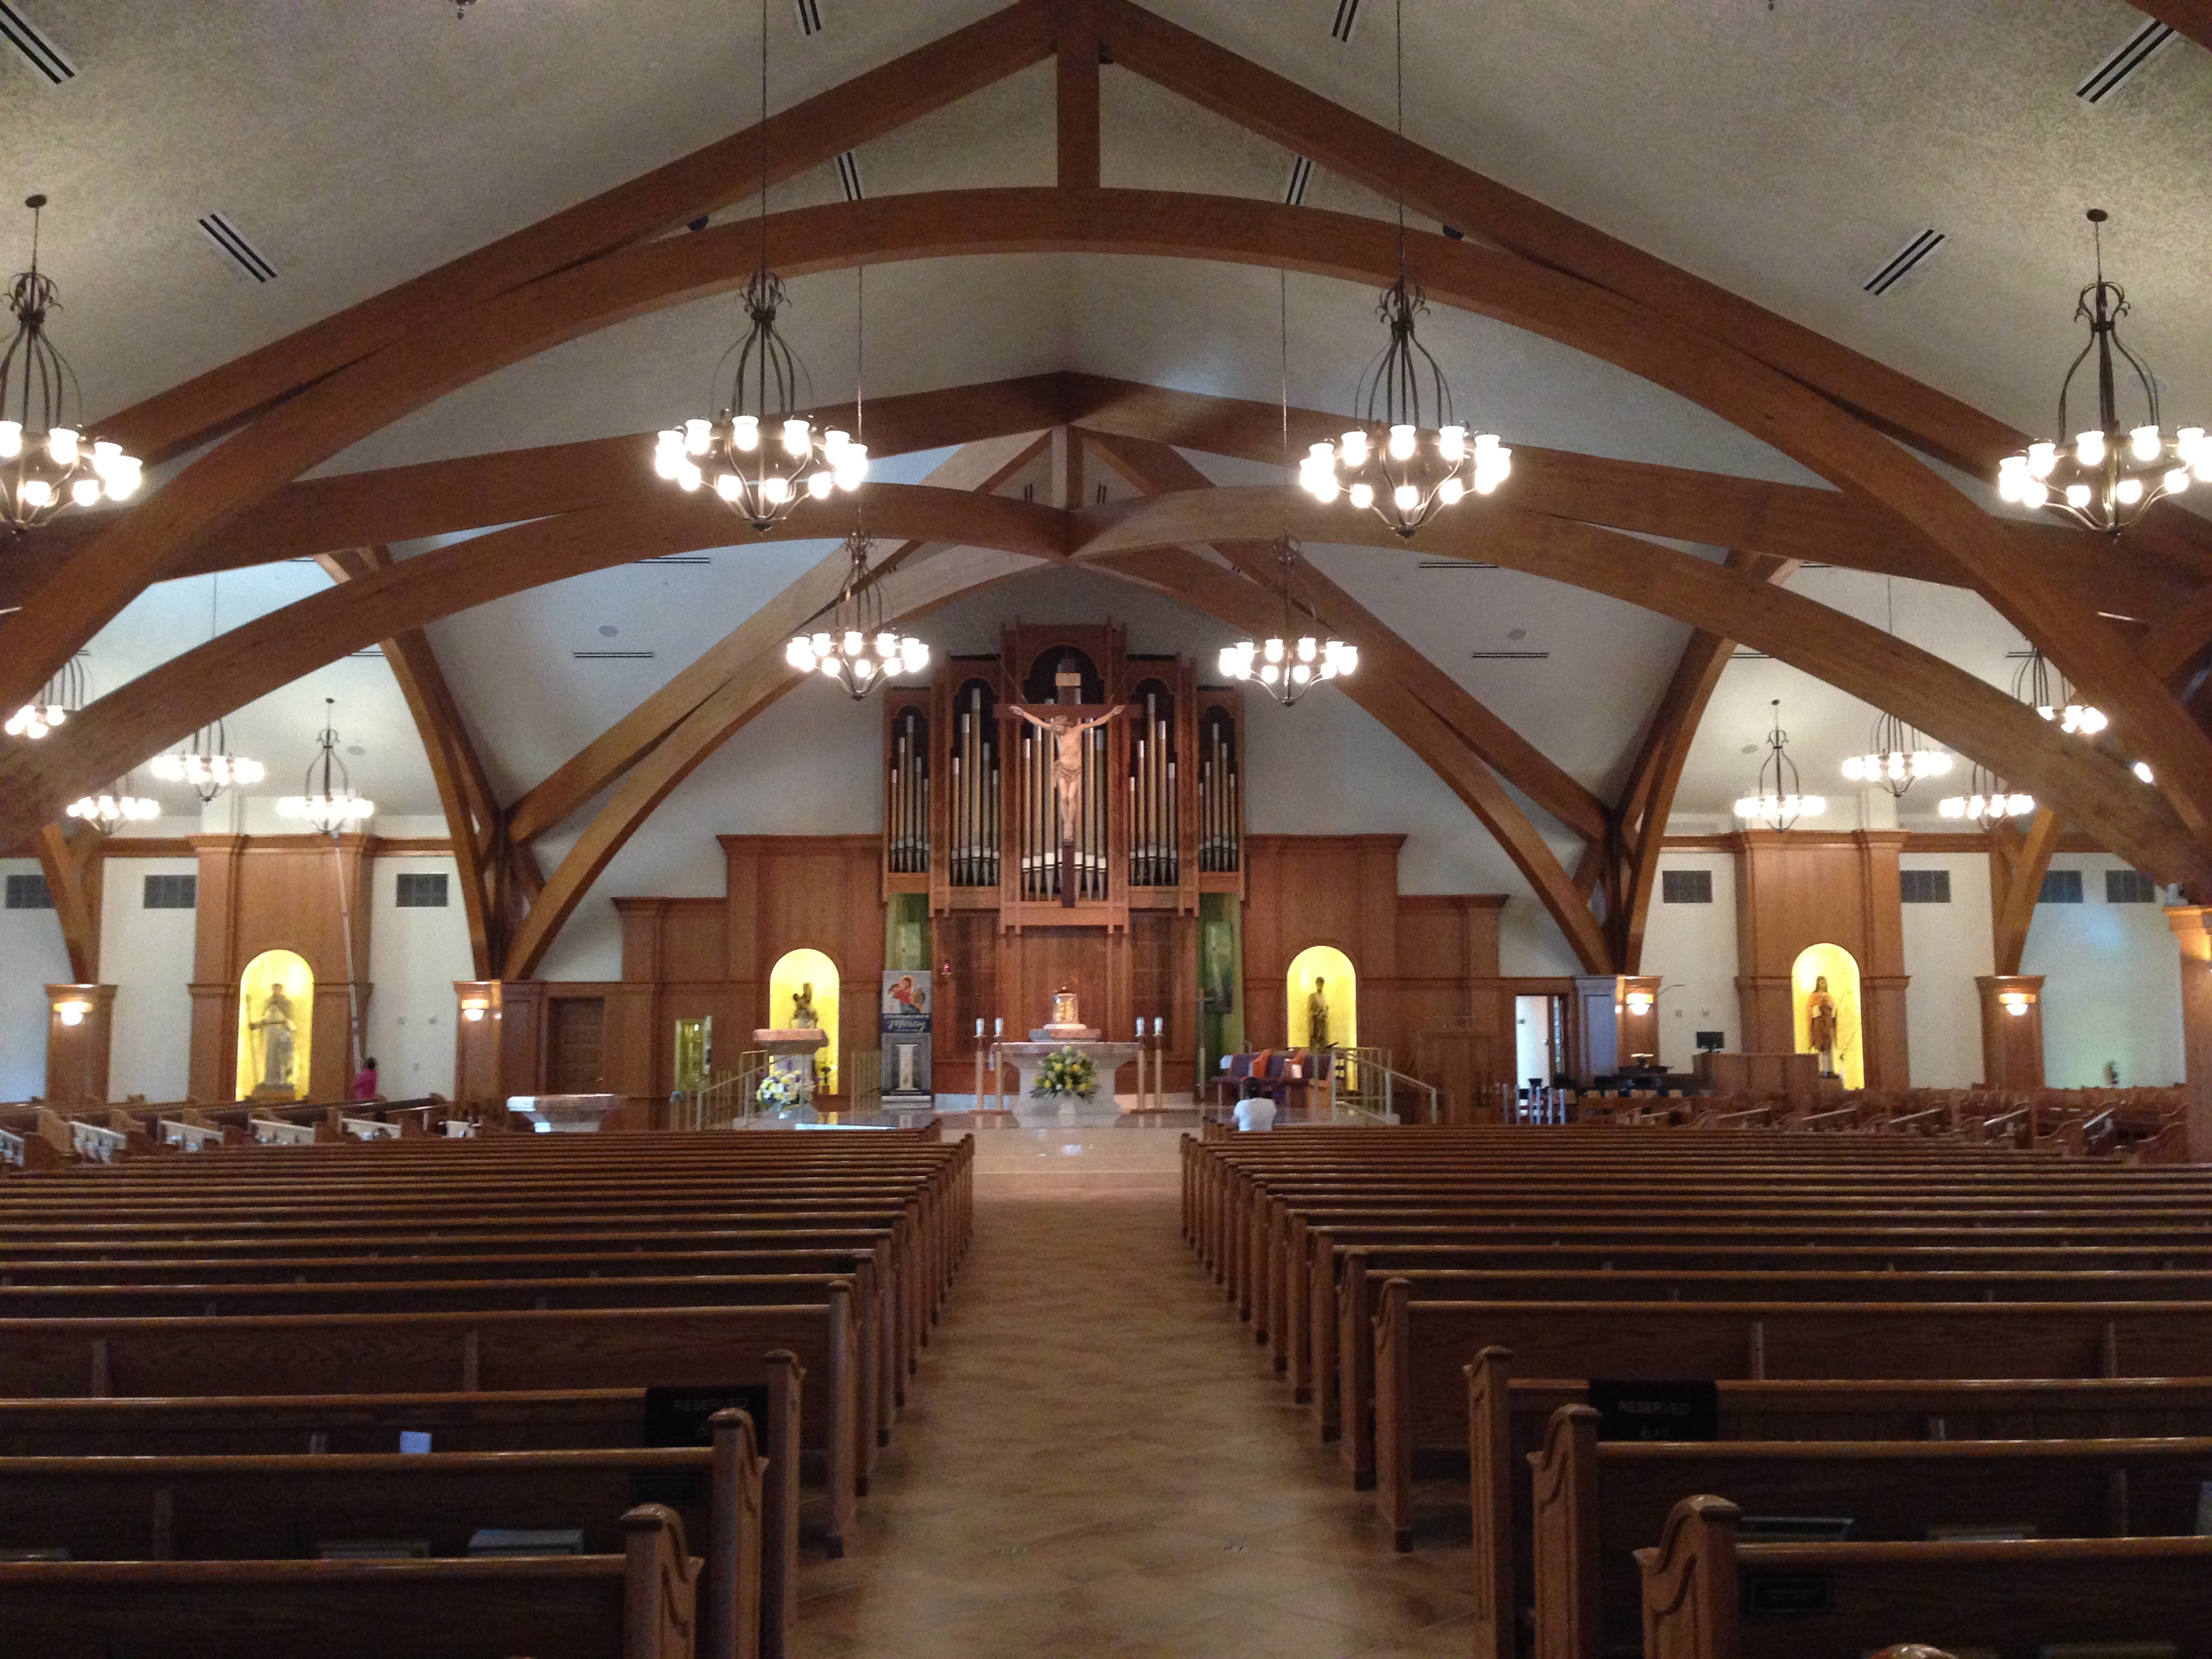 Interior of St William Catholic Church in Naples, FL where I am serving since 2015.